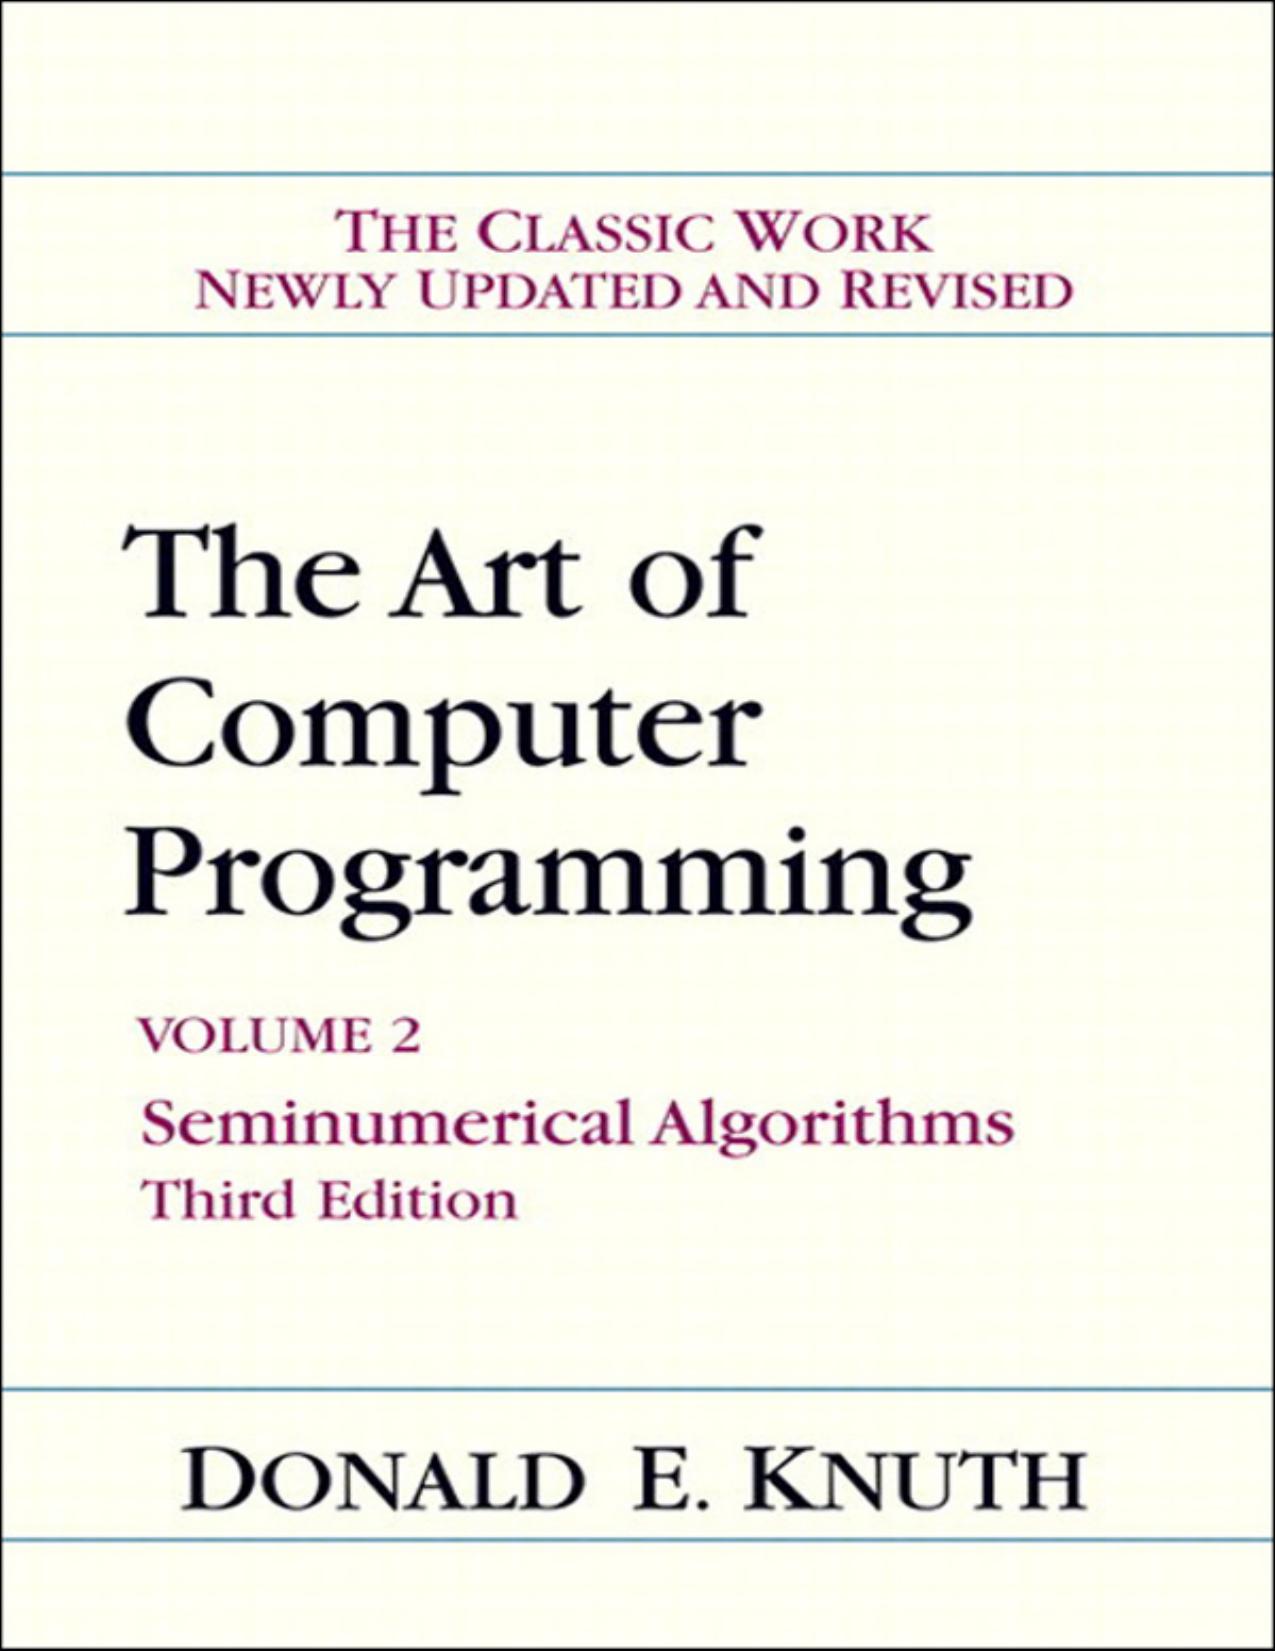 Art of Computer Programming, Volume 2: Seminumerical Algorithms, Third Edition by Donald E. Knuth